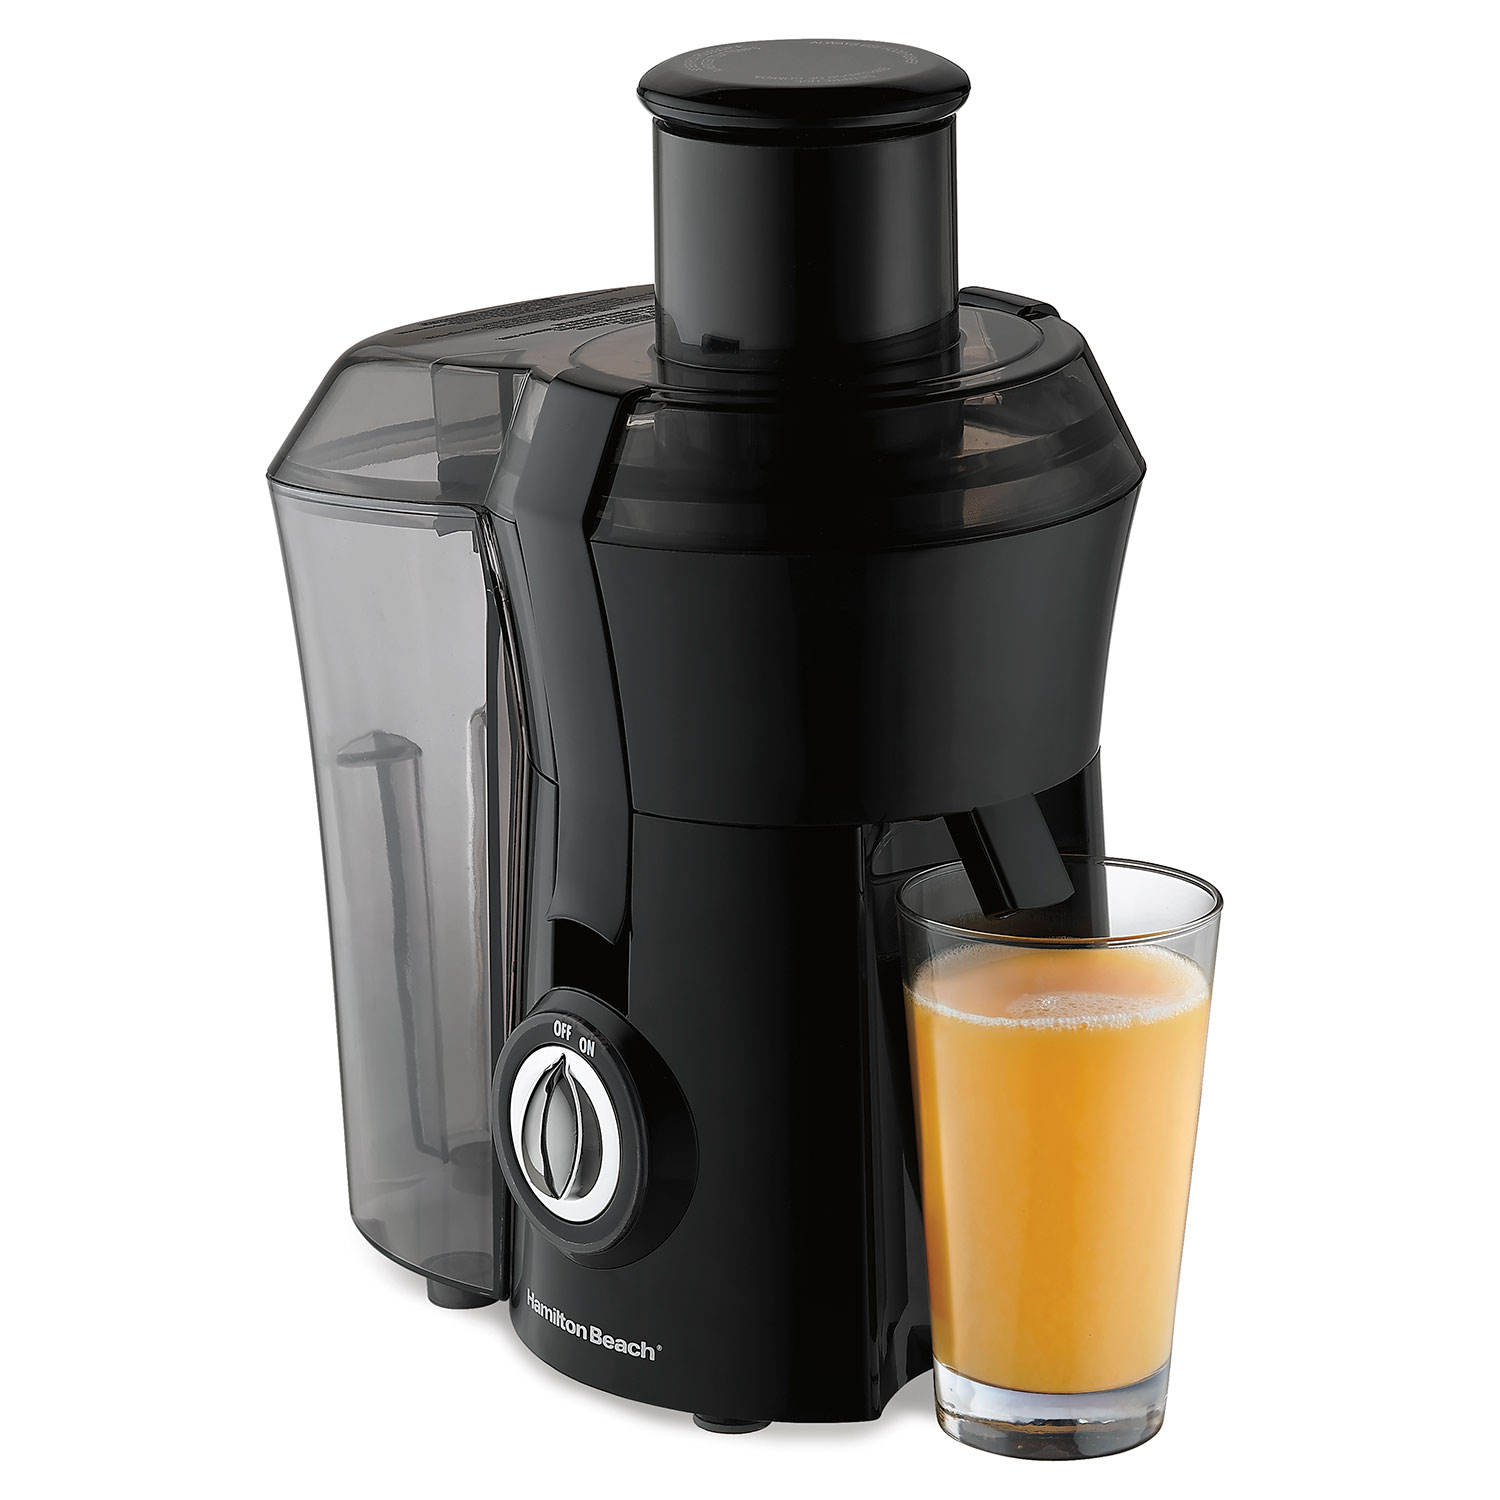 Big Mouth® Juice Extractor - (67601A)